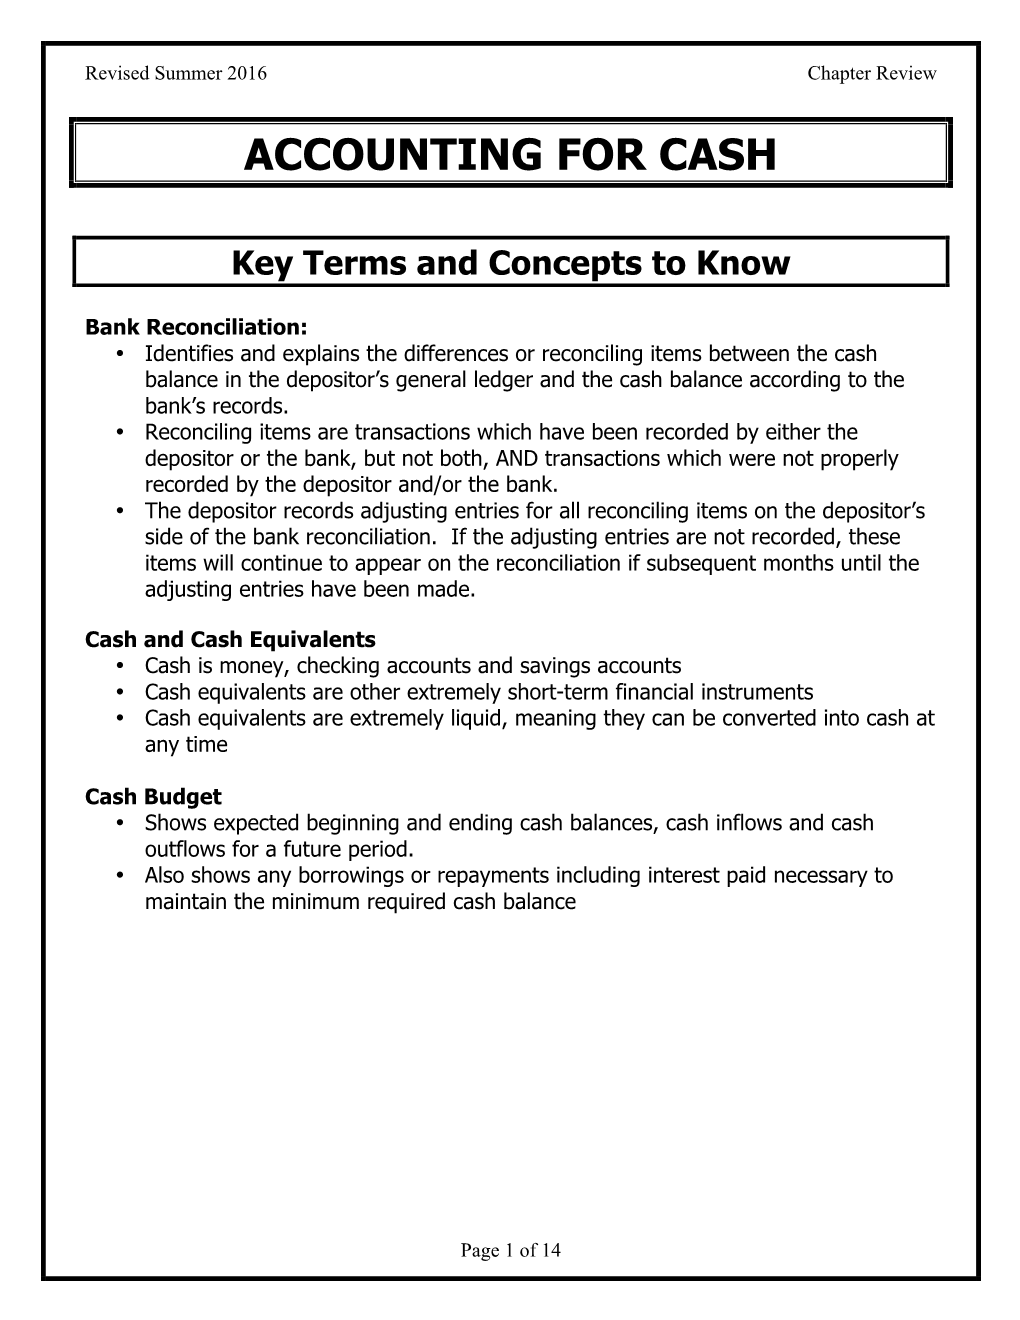 Accounting for Cash